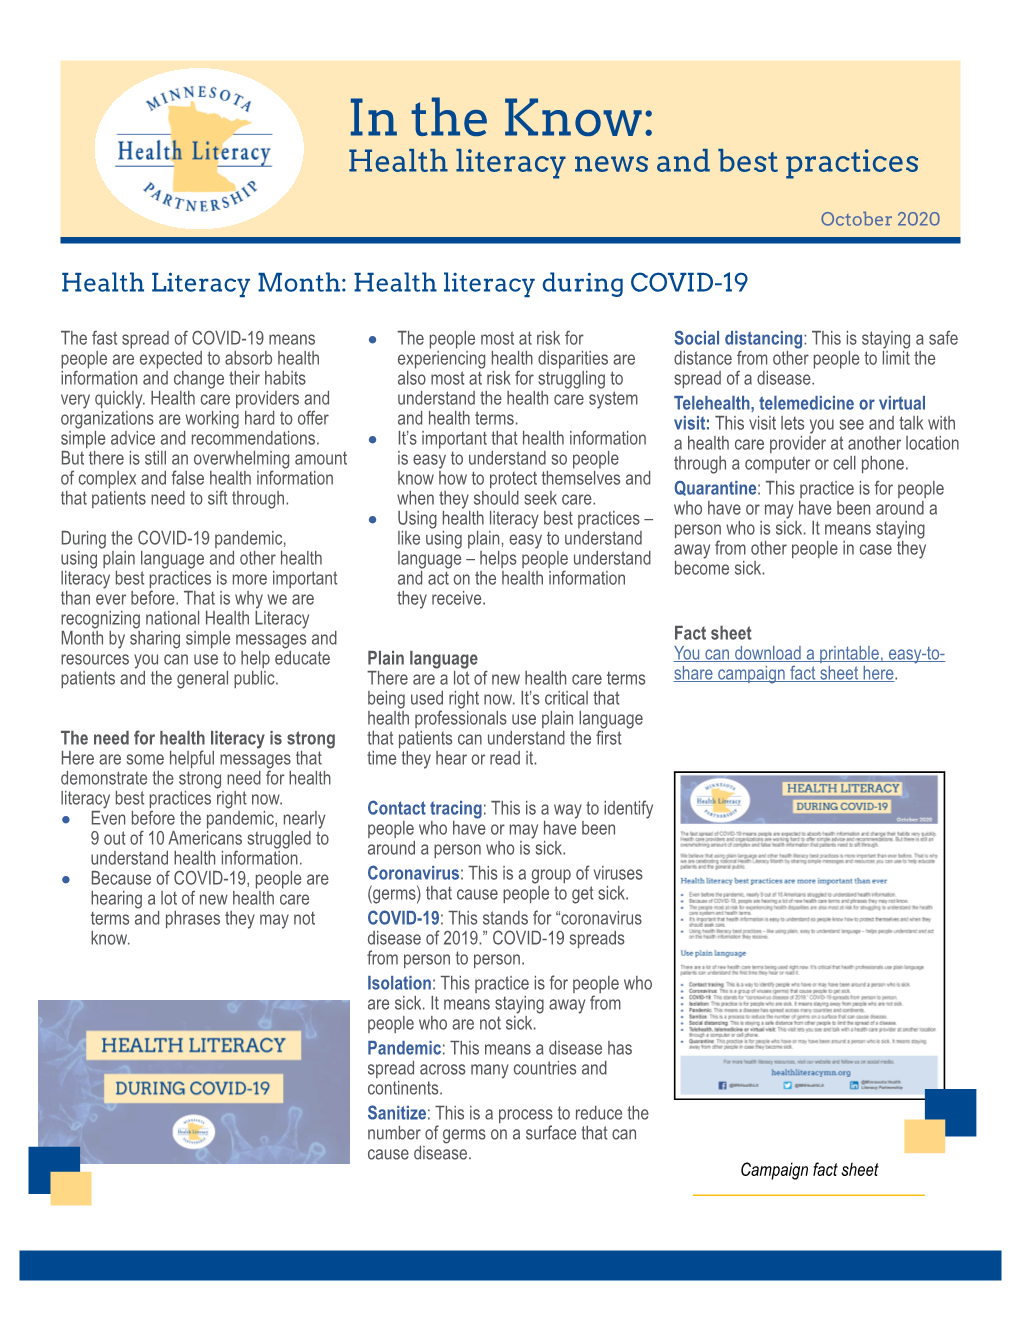 In the Know: Health Literacy News and Best Practices